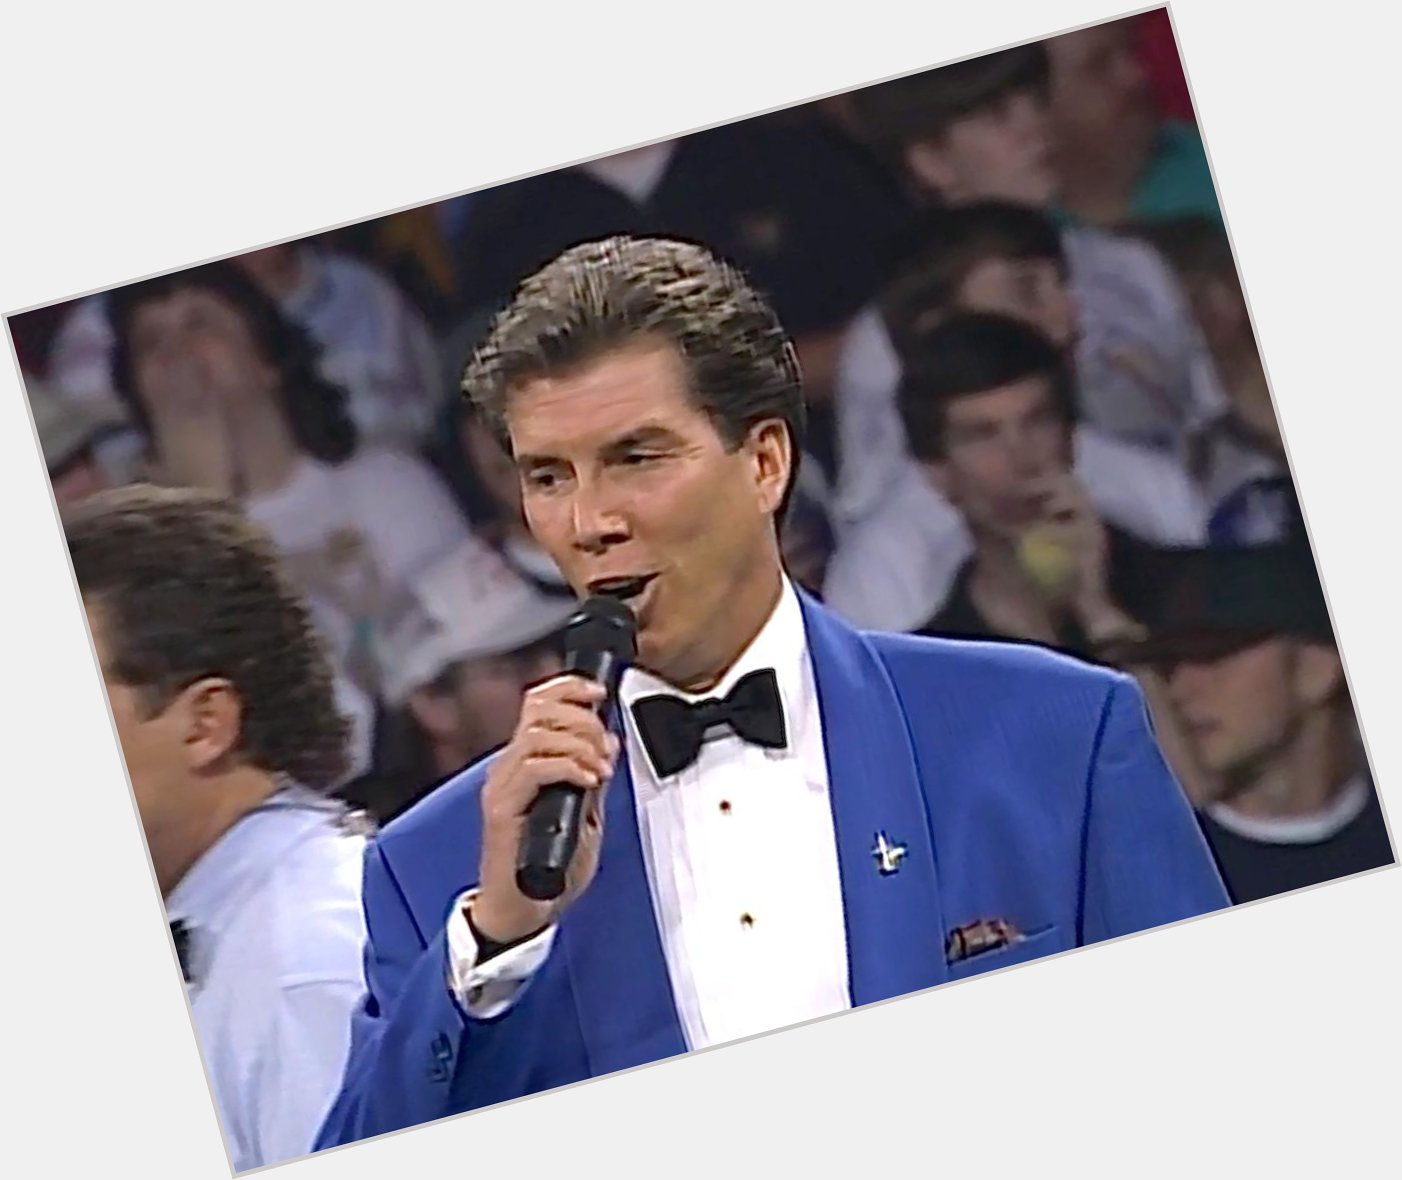 Happy Birthday to Michael Buffer, who turns 70 today! 